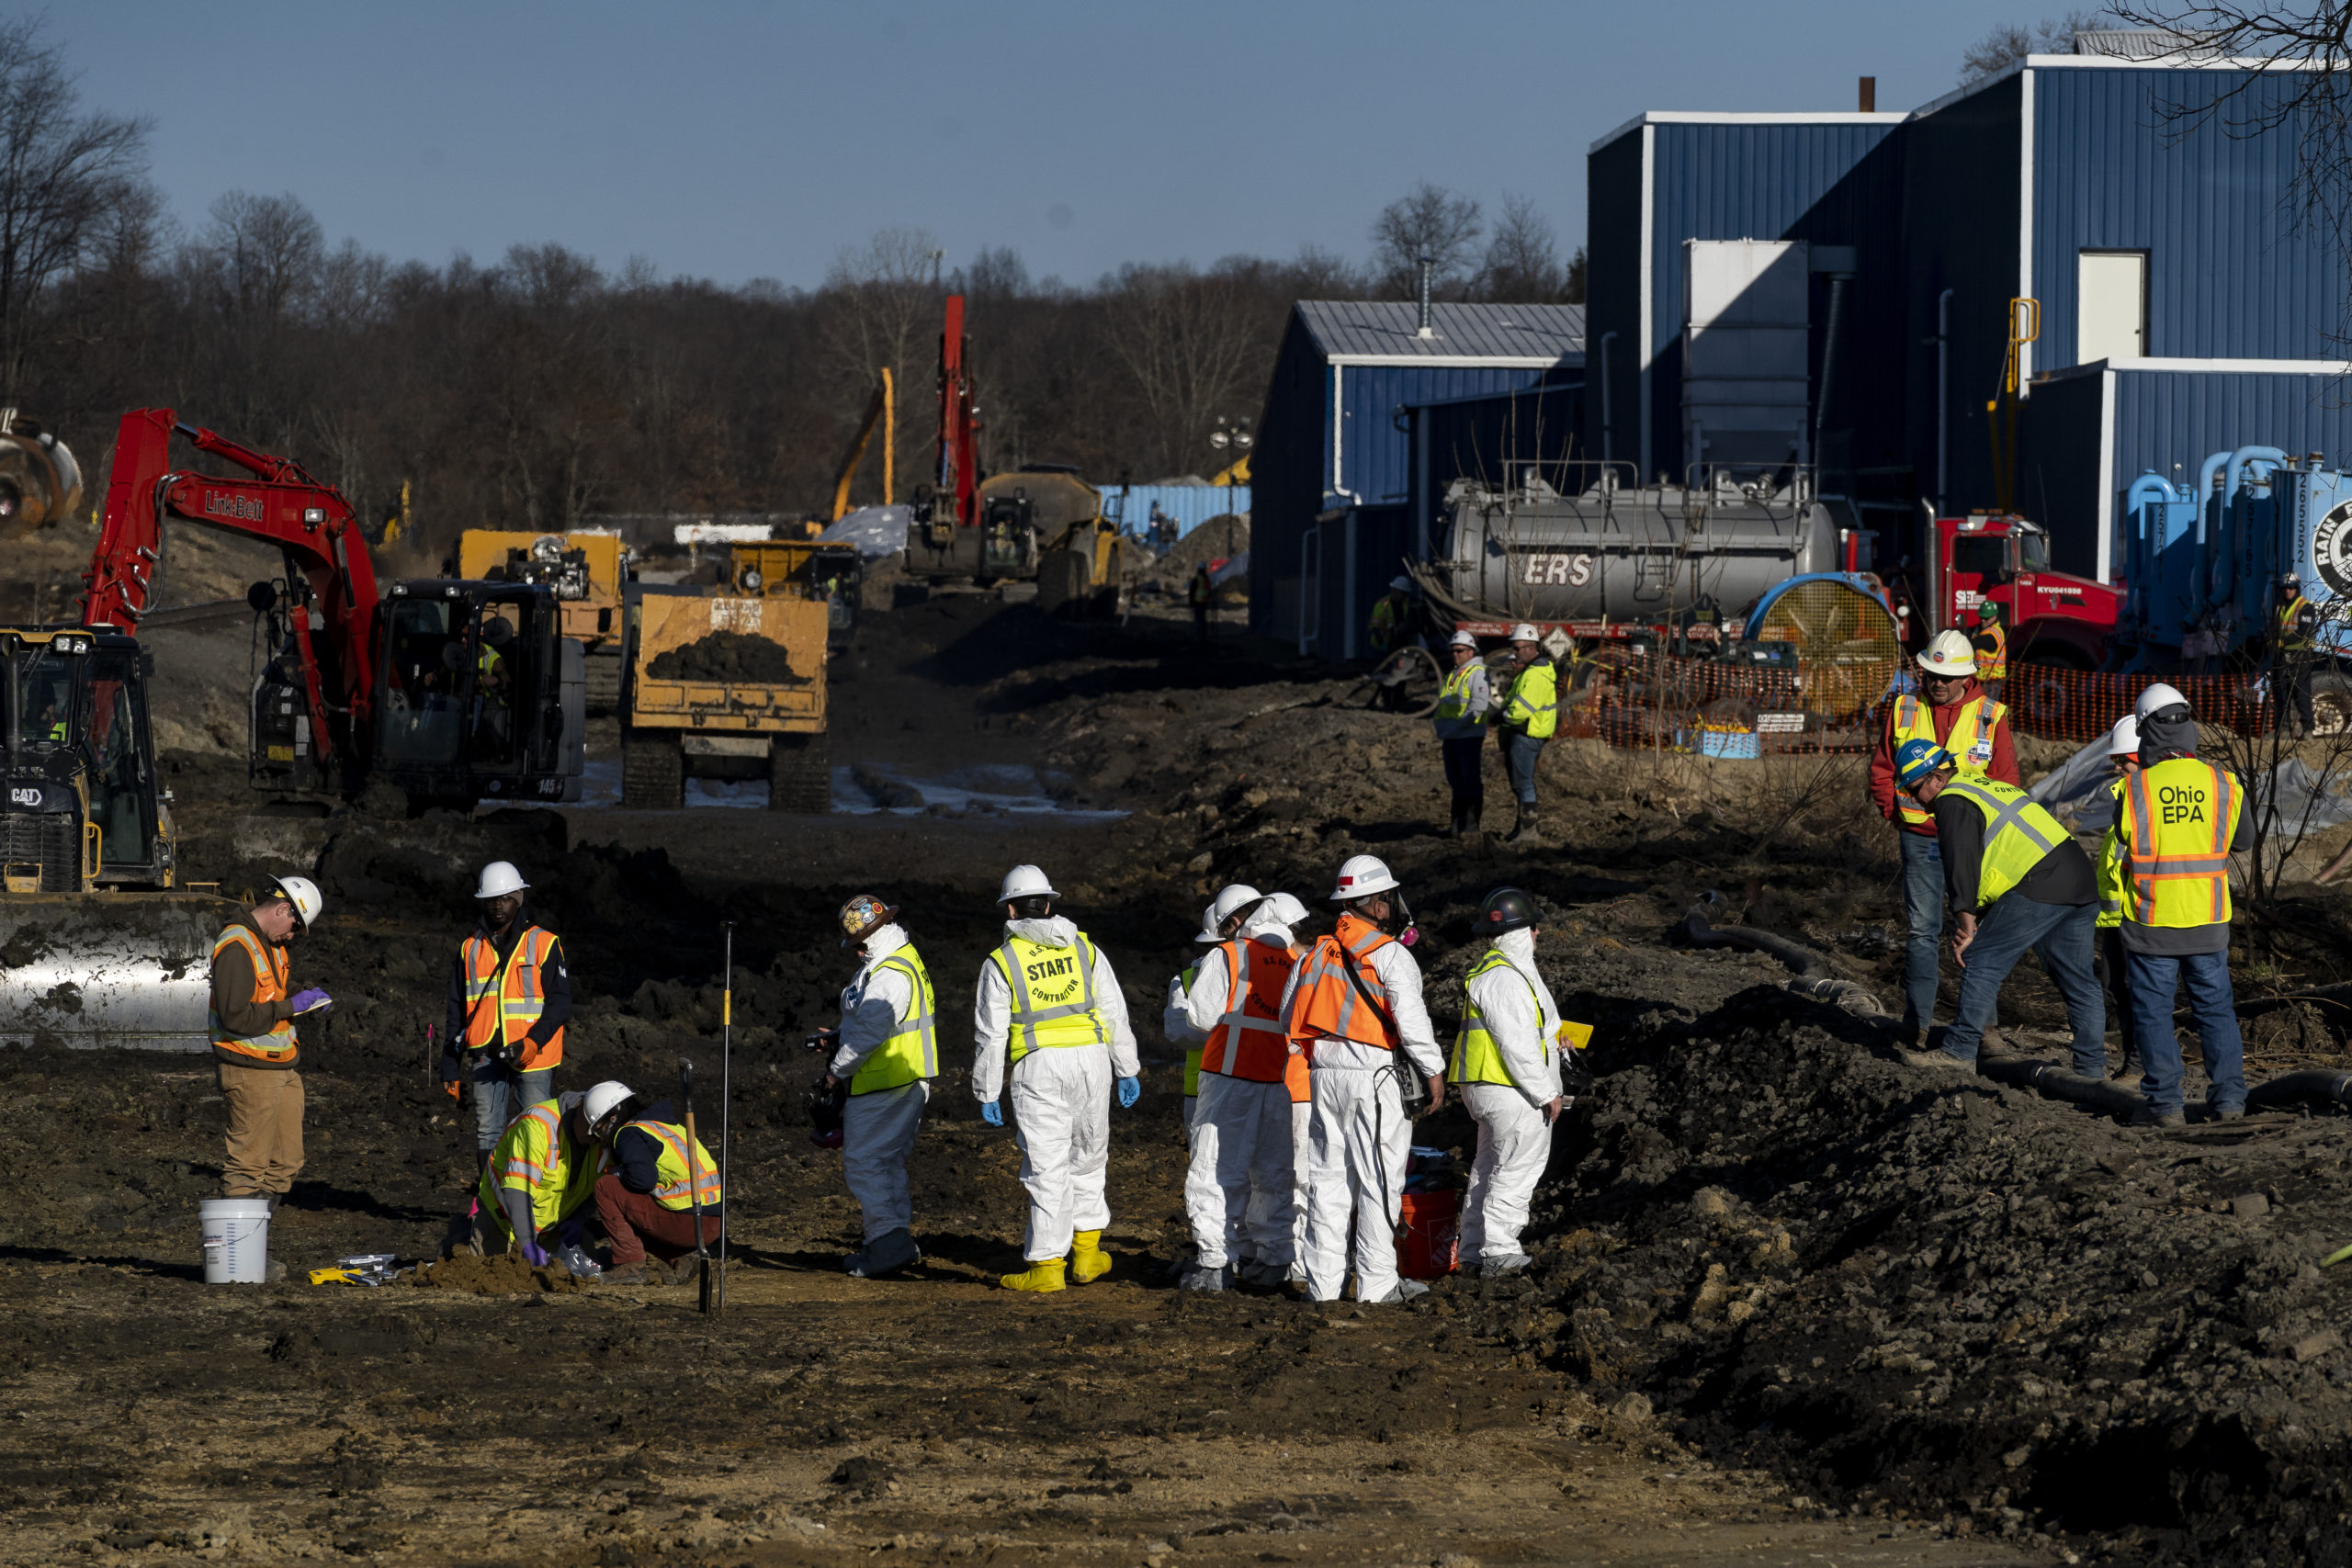 Ohio EPA and EPA contractors collect soil and air samples from the derailment site on March 9, 2023 in East Palestine, Ohio.